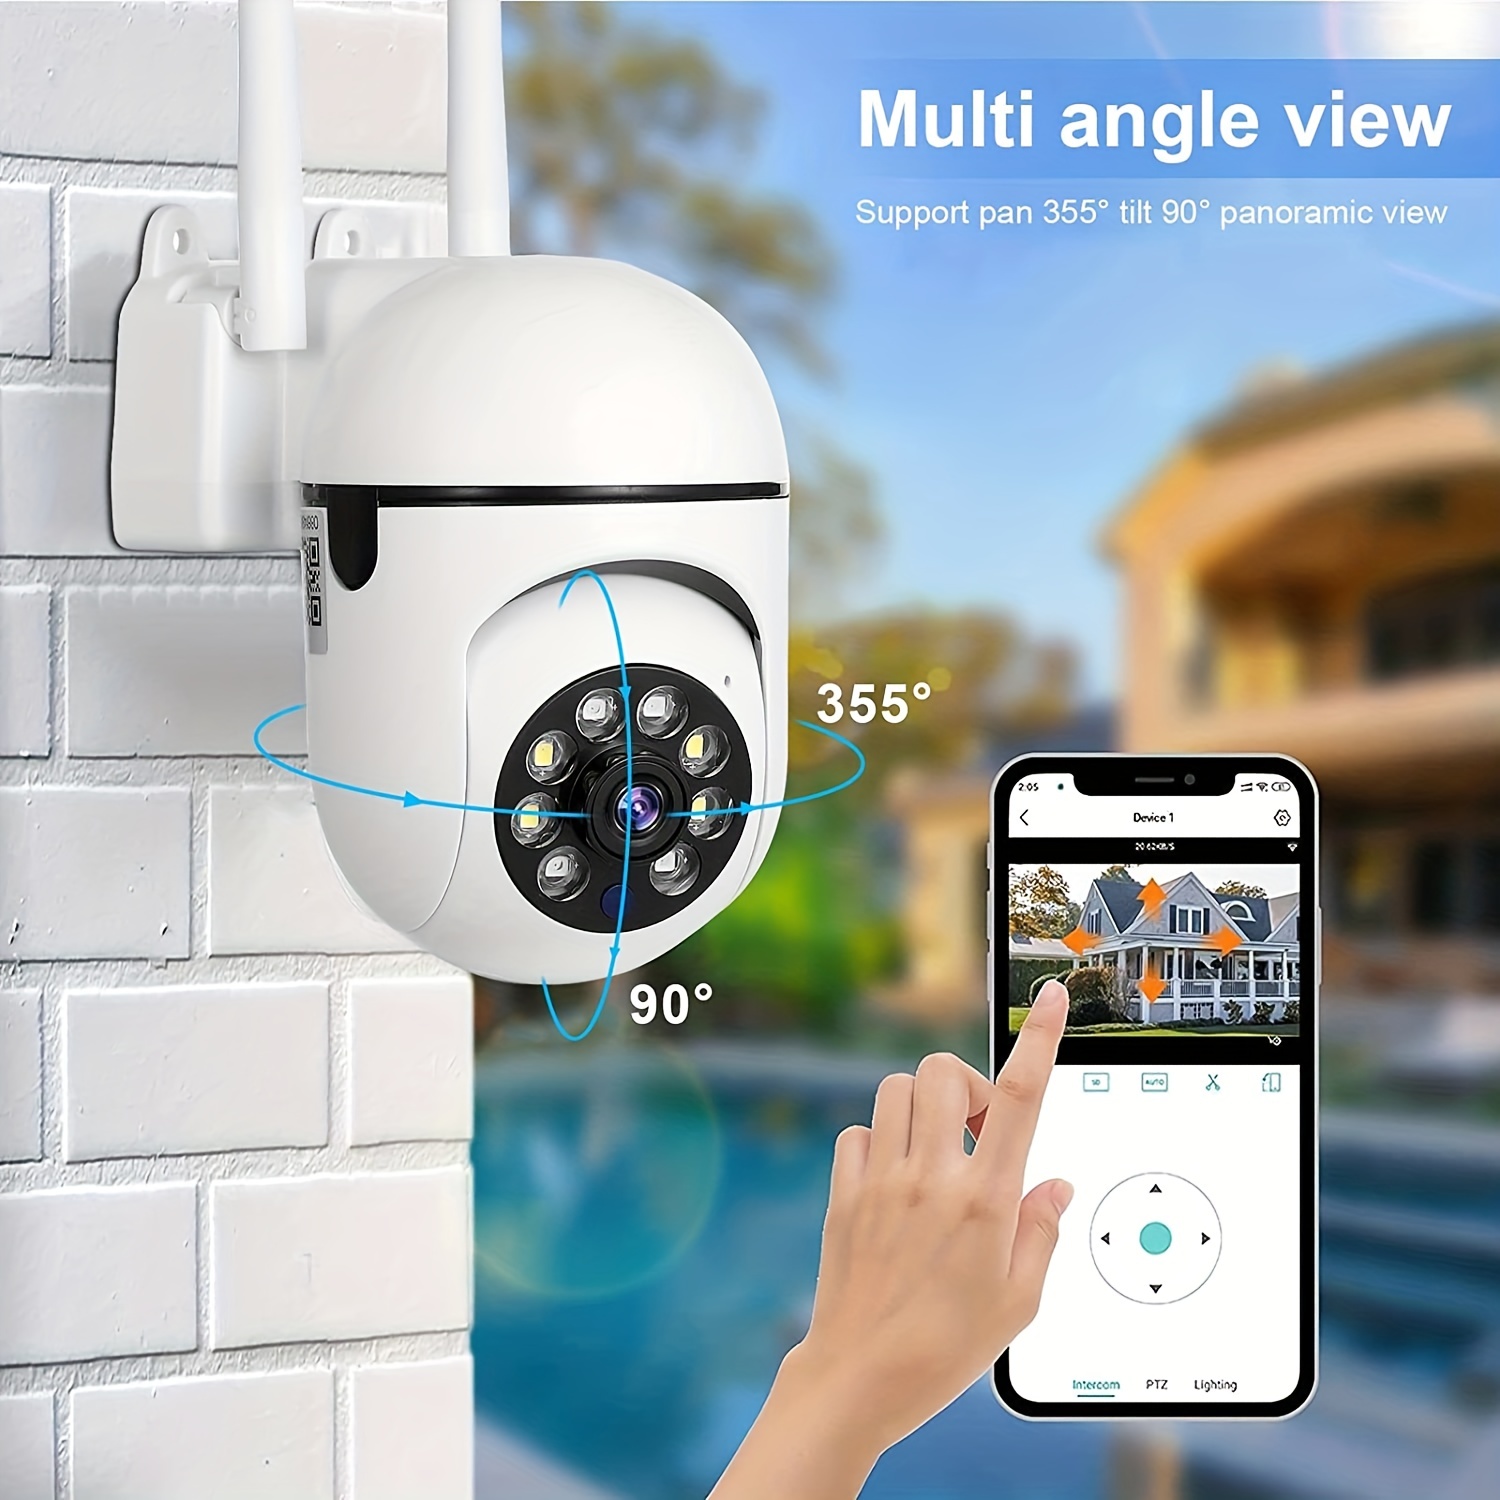 

Wireless 360° Surveillance Camera - Monitor Your Home Day & Night With Mobile Phone Remote & E27 Lamp!